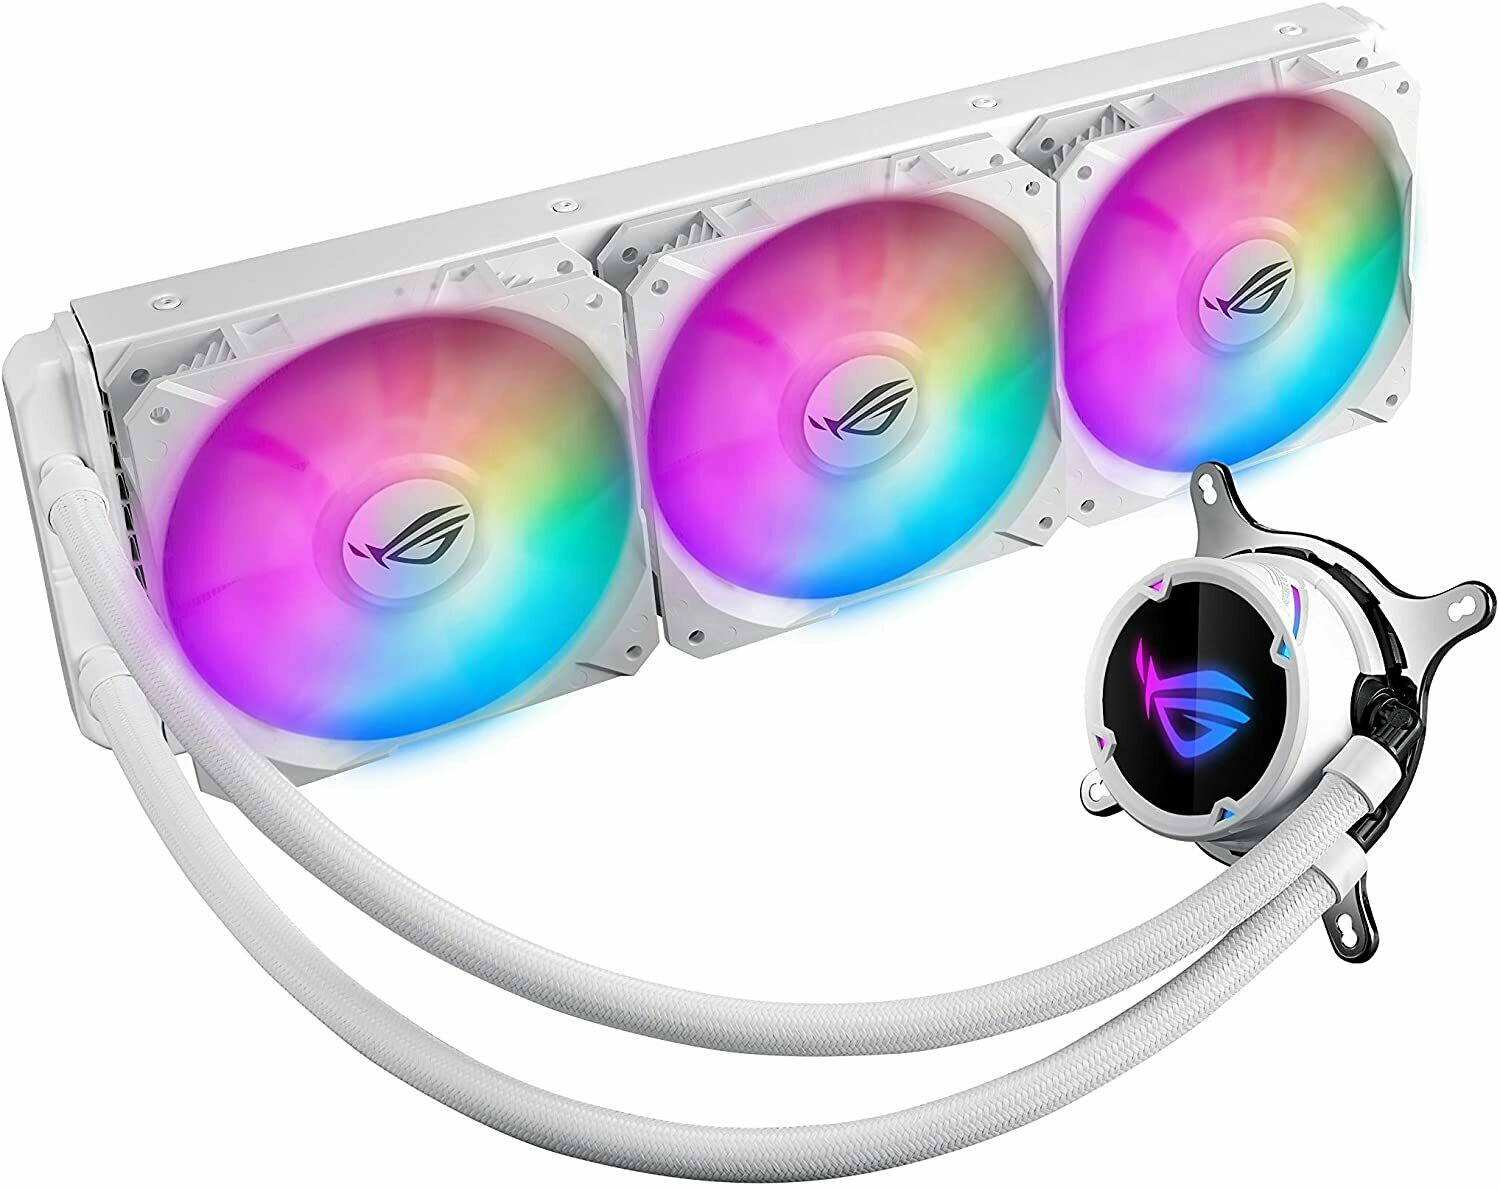 Asus ROG Strix LC 360 All-in-one White Liquid CPU Cooler with Aura Sync, Triple White ROG 120mm addressable RGB Radiator Fans and Reinforced Sleeved tubing